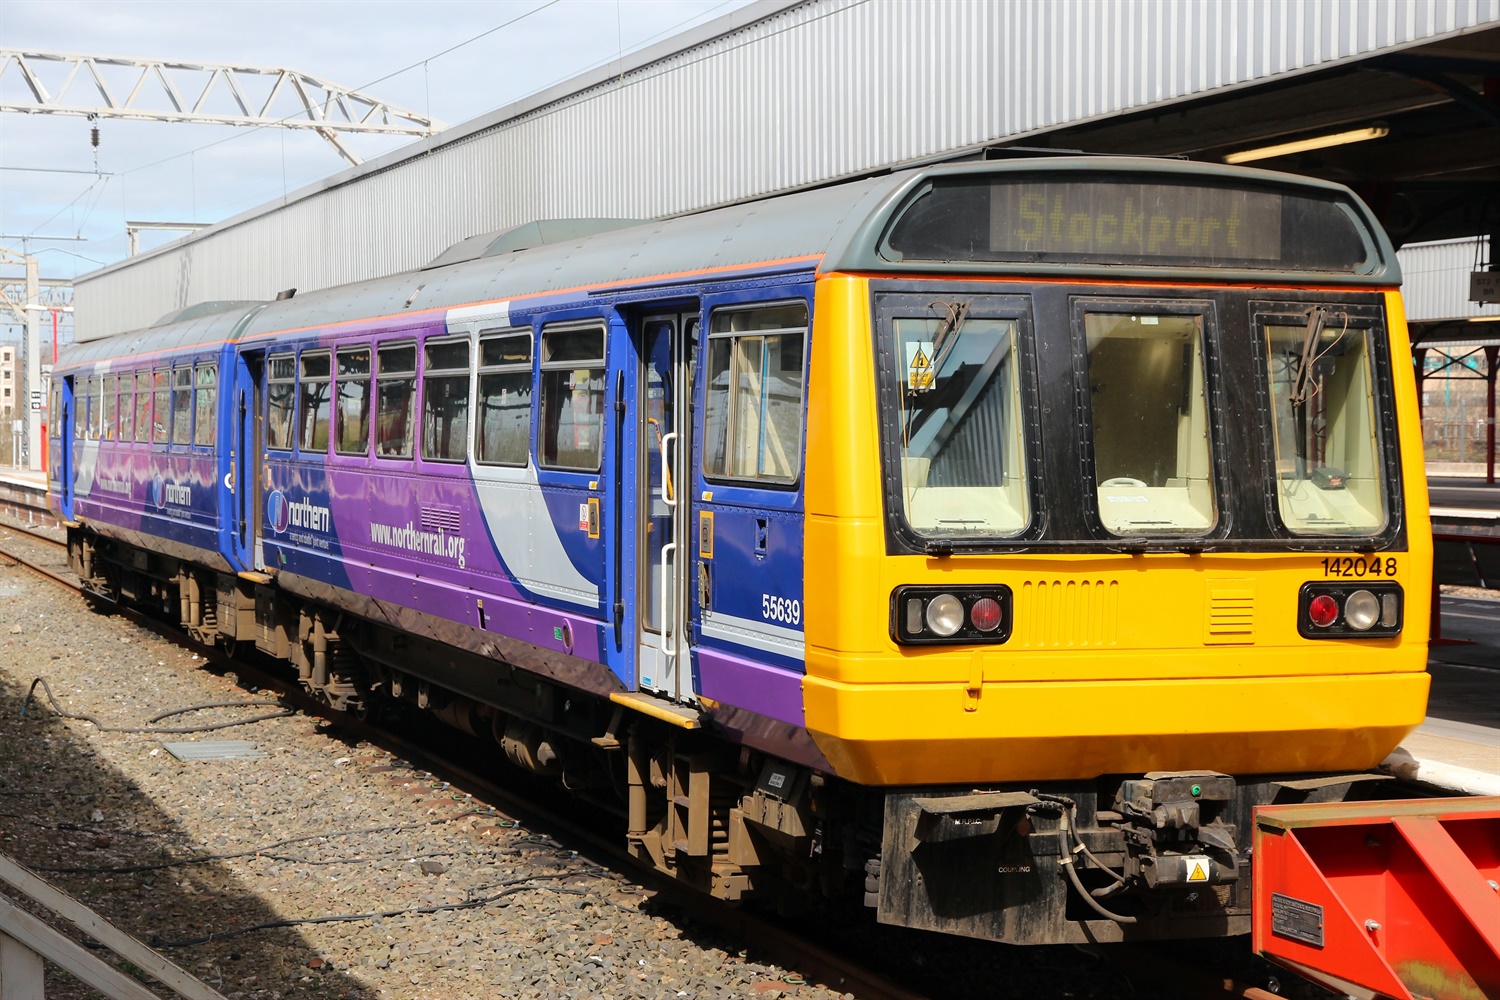 40-year-old Pacer trains in East Lancashire gone by end of the year, assures Northern